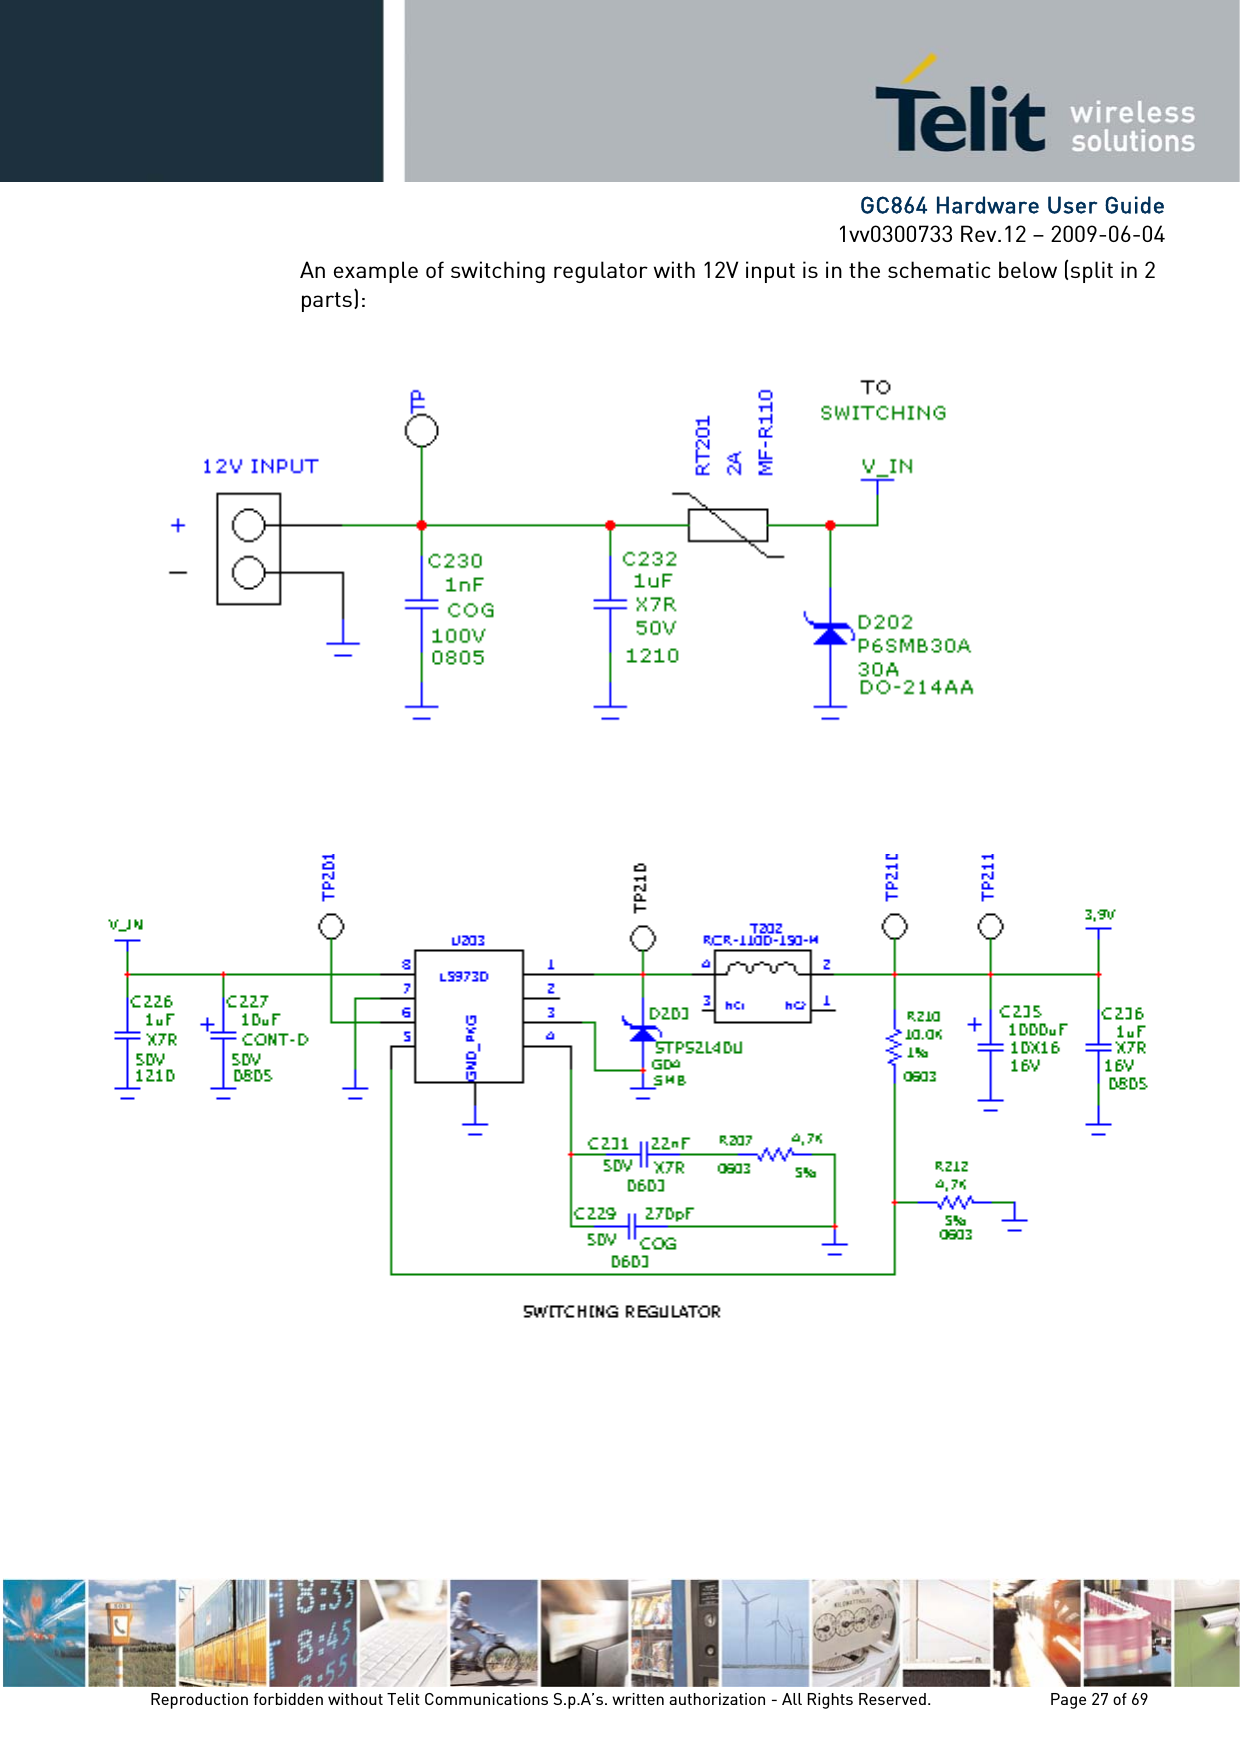      GC864 Hardware User Guide 1vv0300733 Rev.12 – 2009-06-04 An example of switching regulator with 12V input is in the schematic below (split in 2 parts):                  Reproduction forbidden without Telit Communications S.p.A’s. written authorization - All Rights Reserved.    Page 27 of 69  